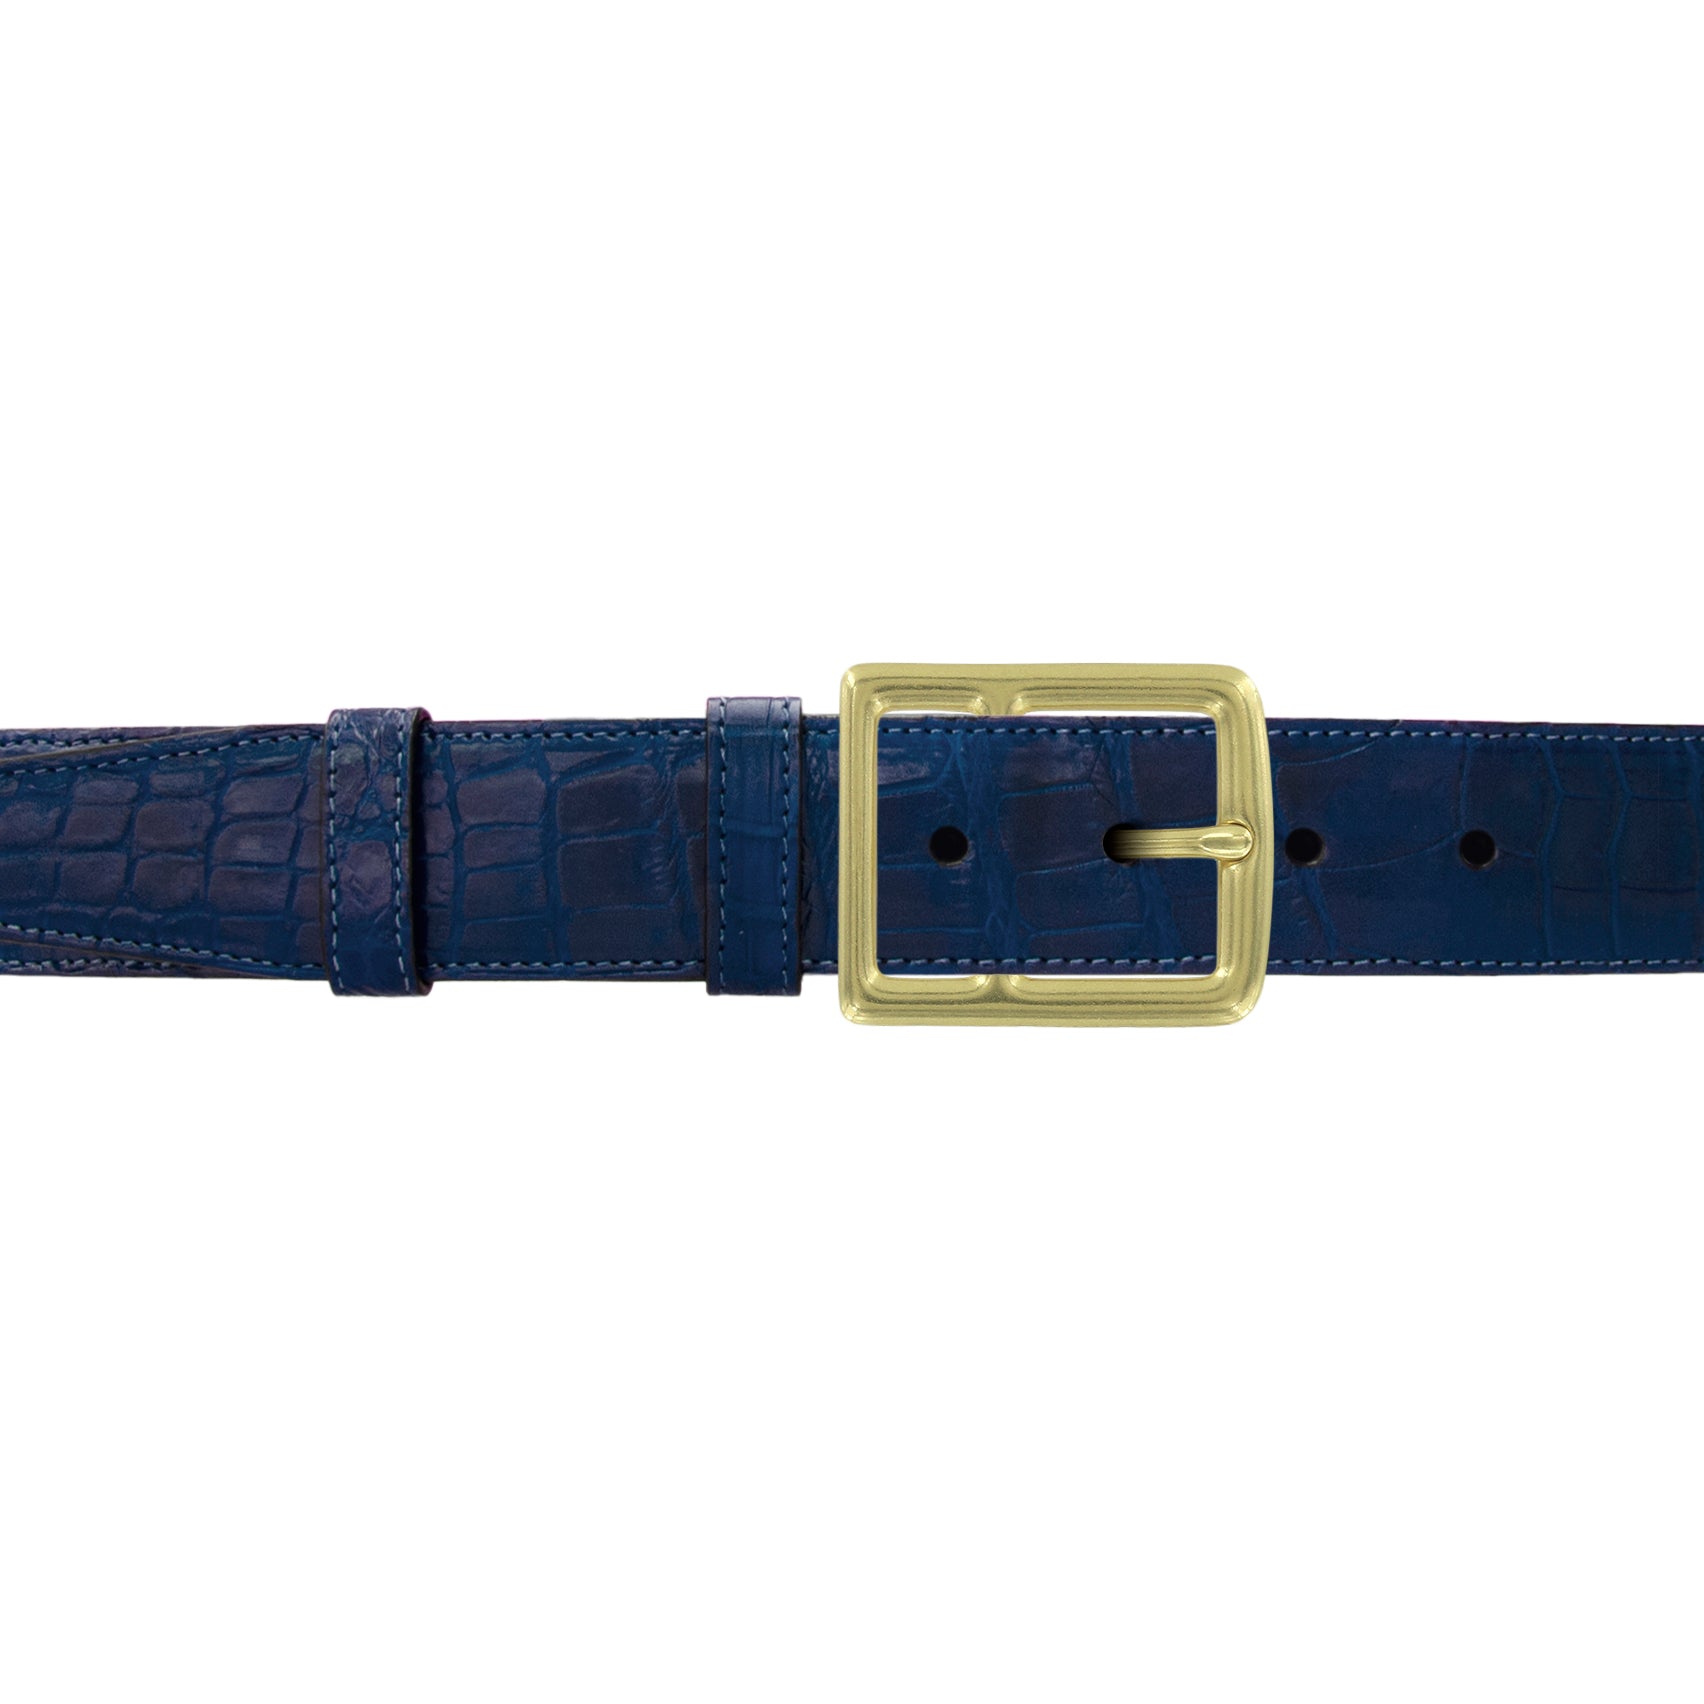 1 1/2" Royal Seasonal Belt with Crawford Casual Buckle in Brass